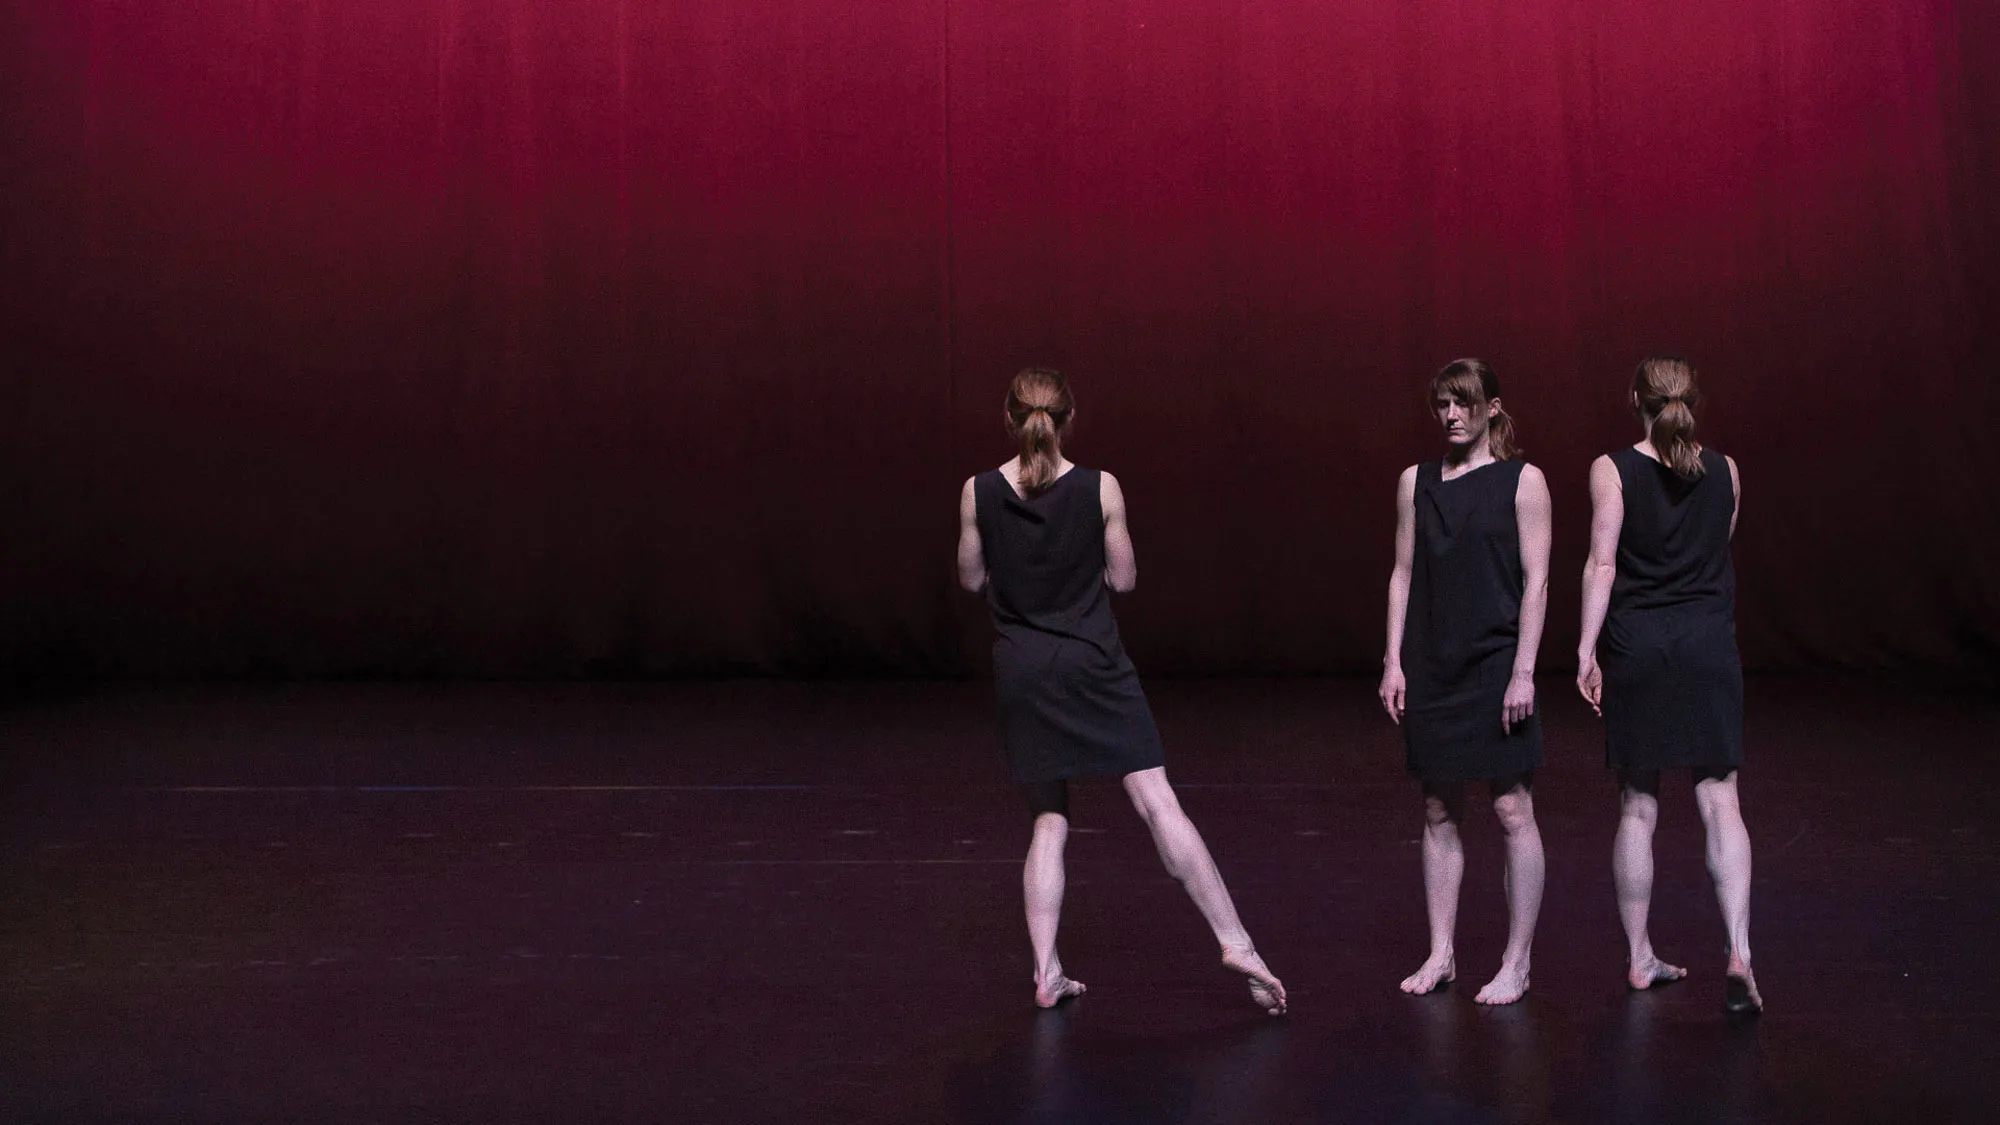 Three female dancers wearing black one shoulder dresses in a tight formation on a stage lit softly in burgundy light. 